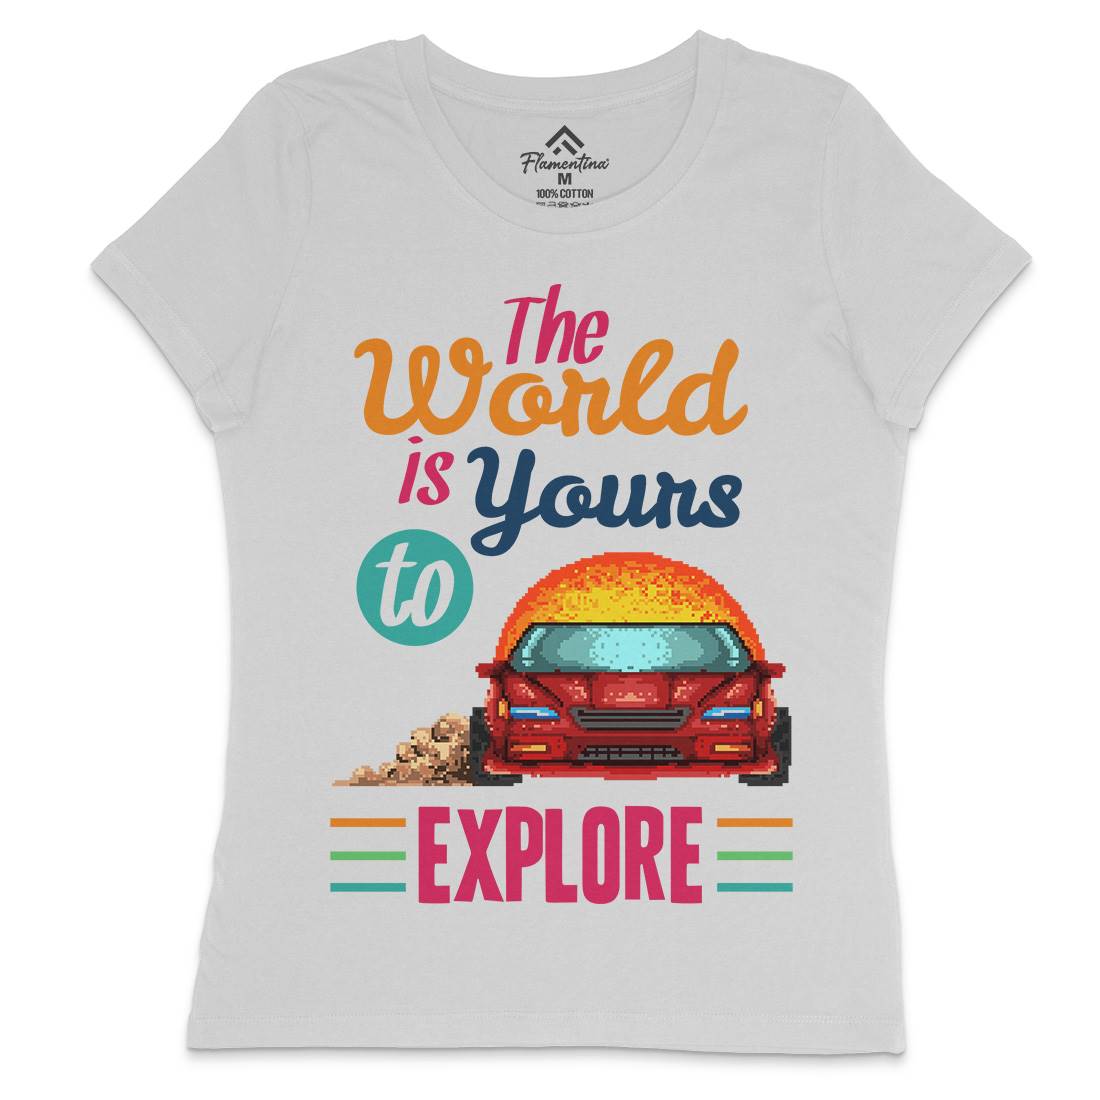 The World Is Yours To Explore Womens Crew Neck T-Shirt Cars B970